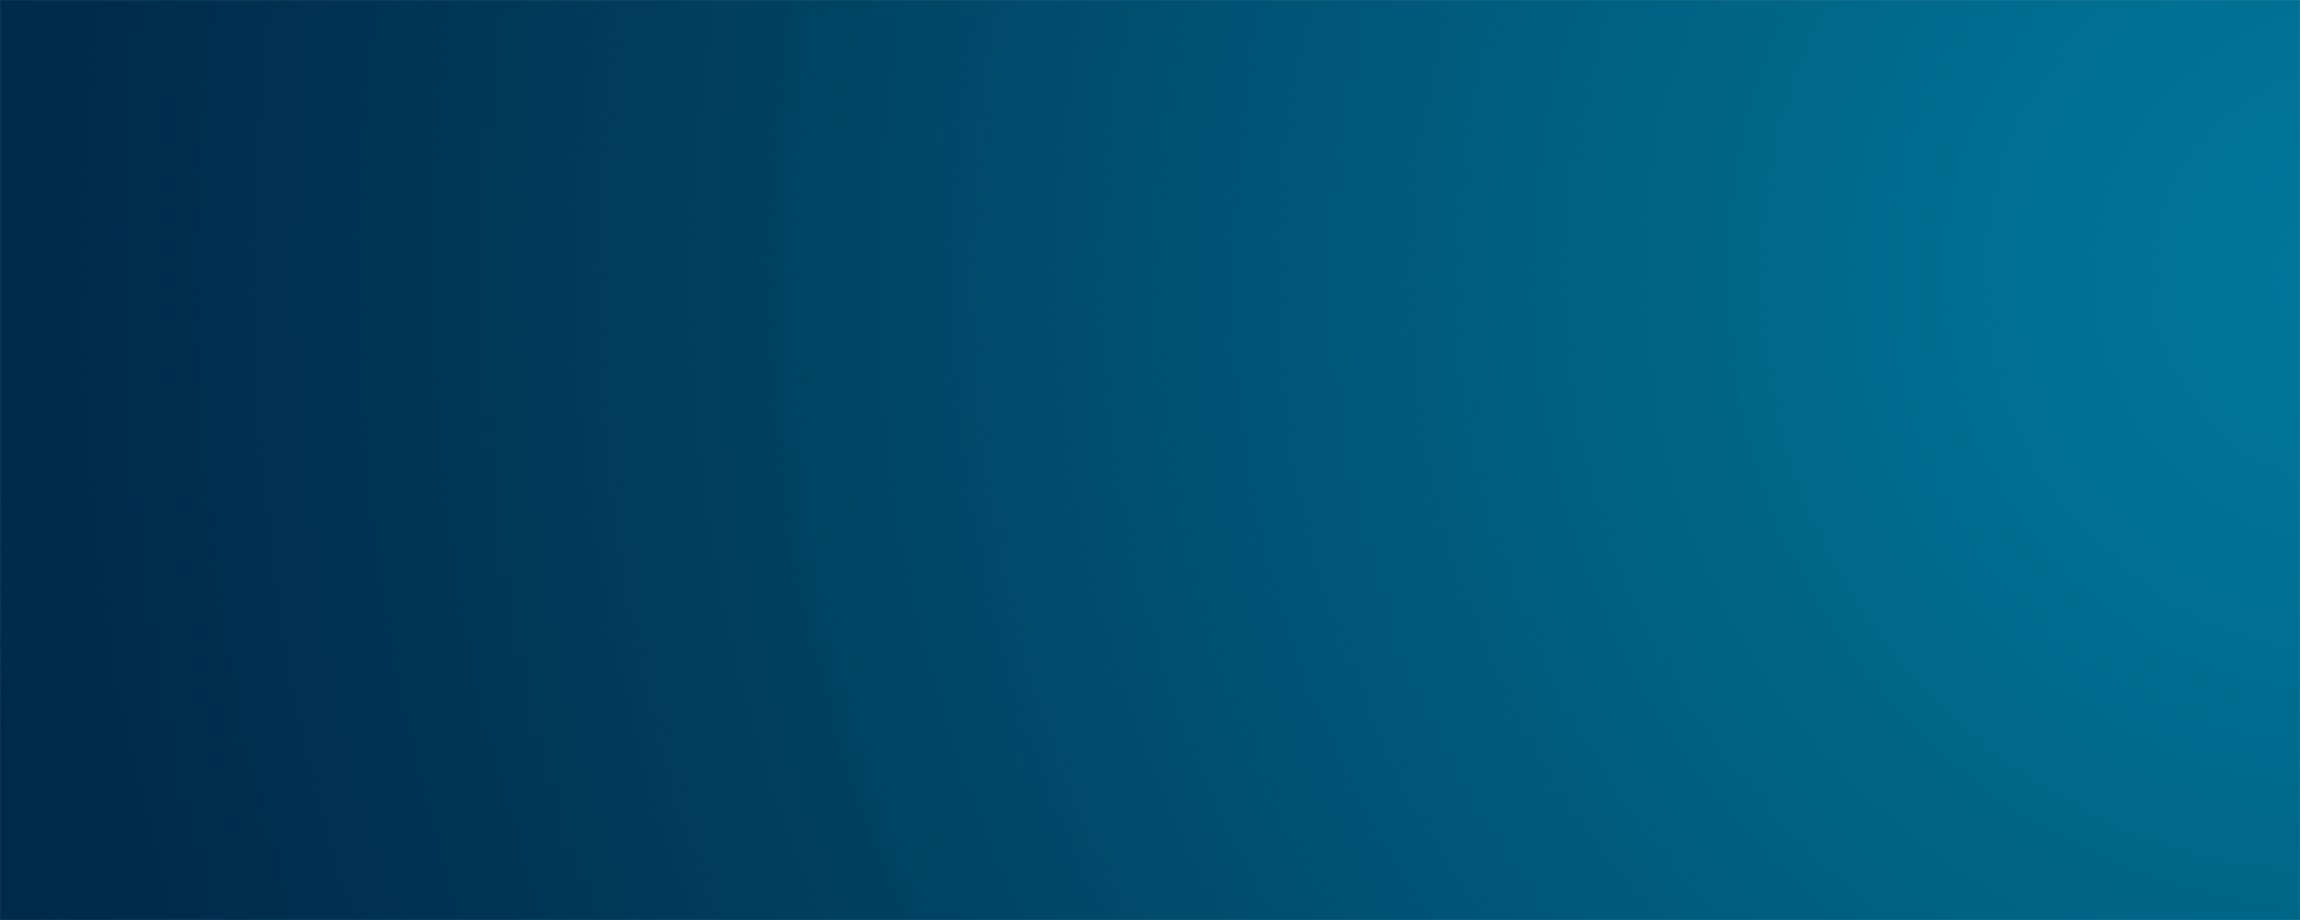 Blue and teal gradient background